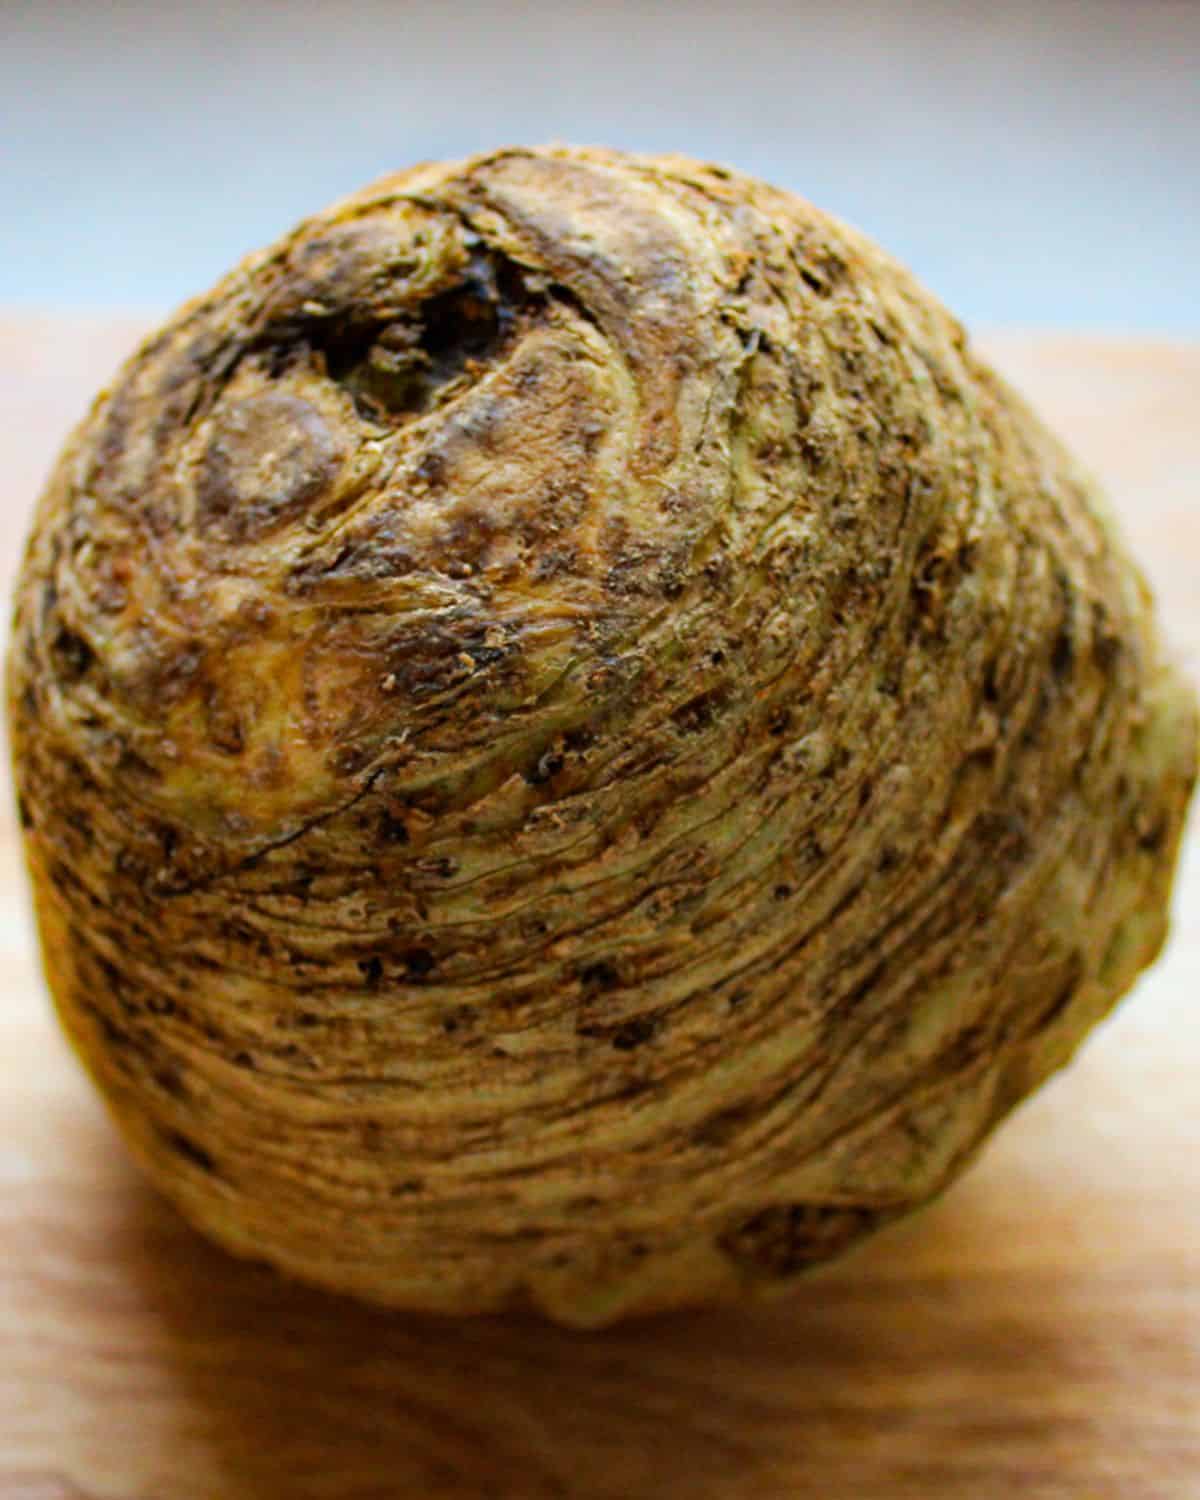 Brown, round root vegetable with bumpy, rough skin on a cutting boar.